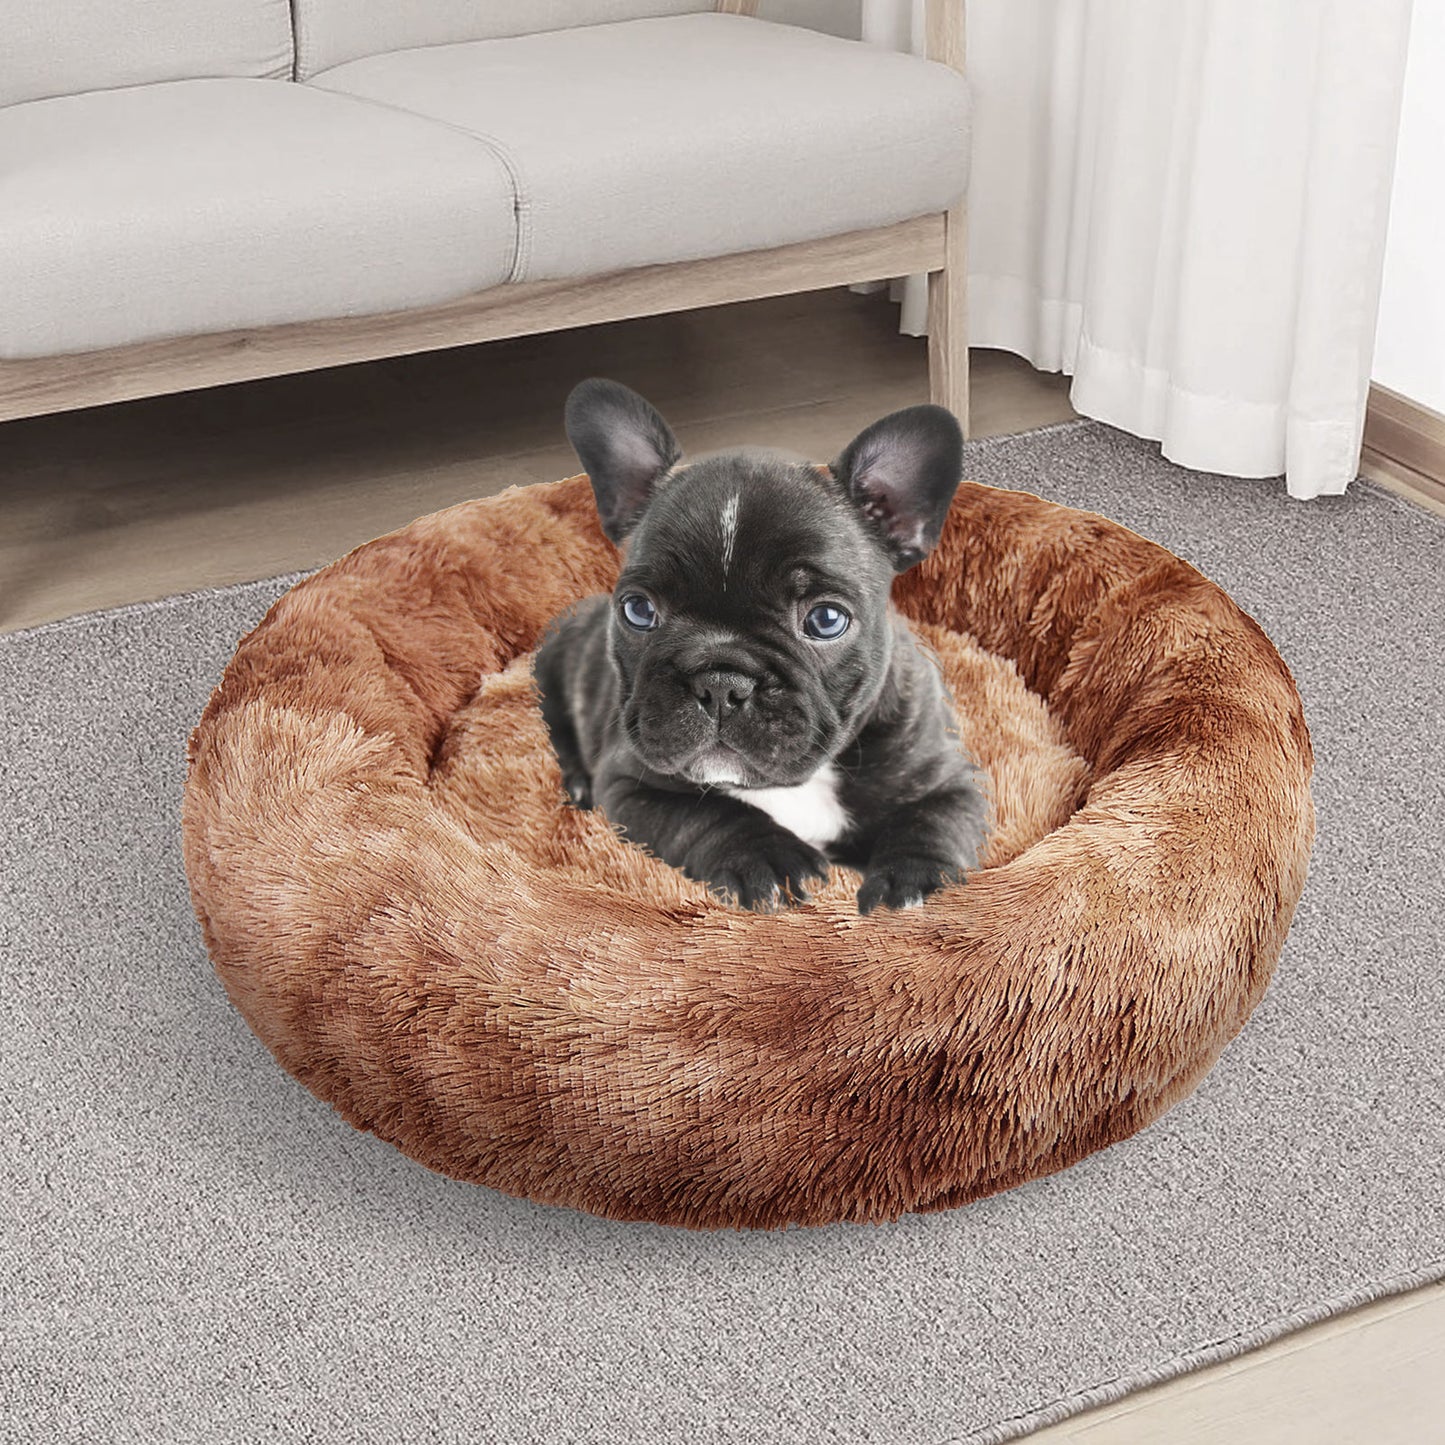 Pawfriends Dog Cat Pet Calming Bed Warm Soft Plush Round Nest Comfy Sleeping Kennel Cave 70